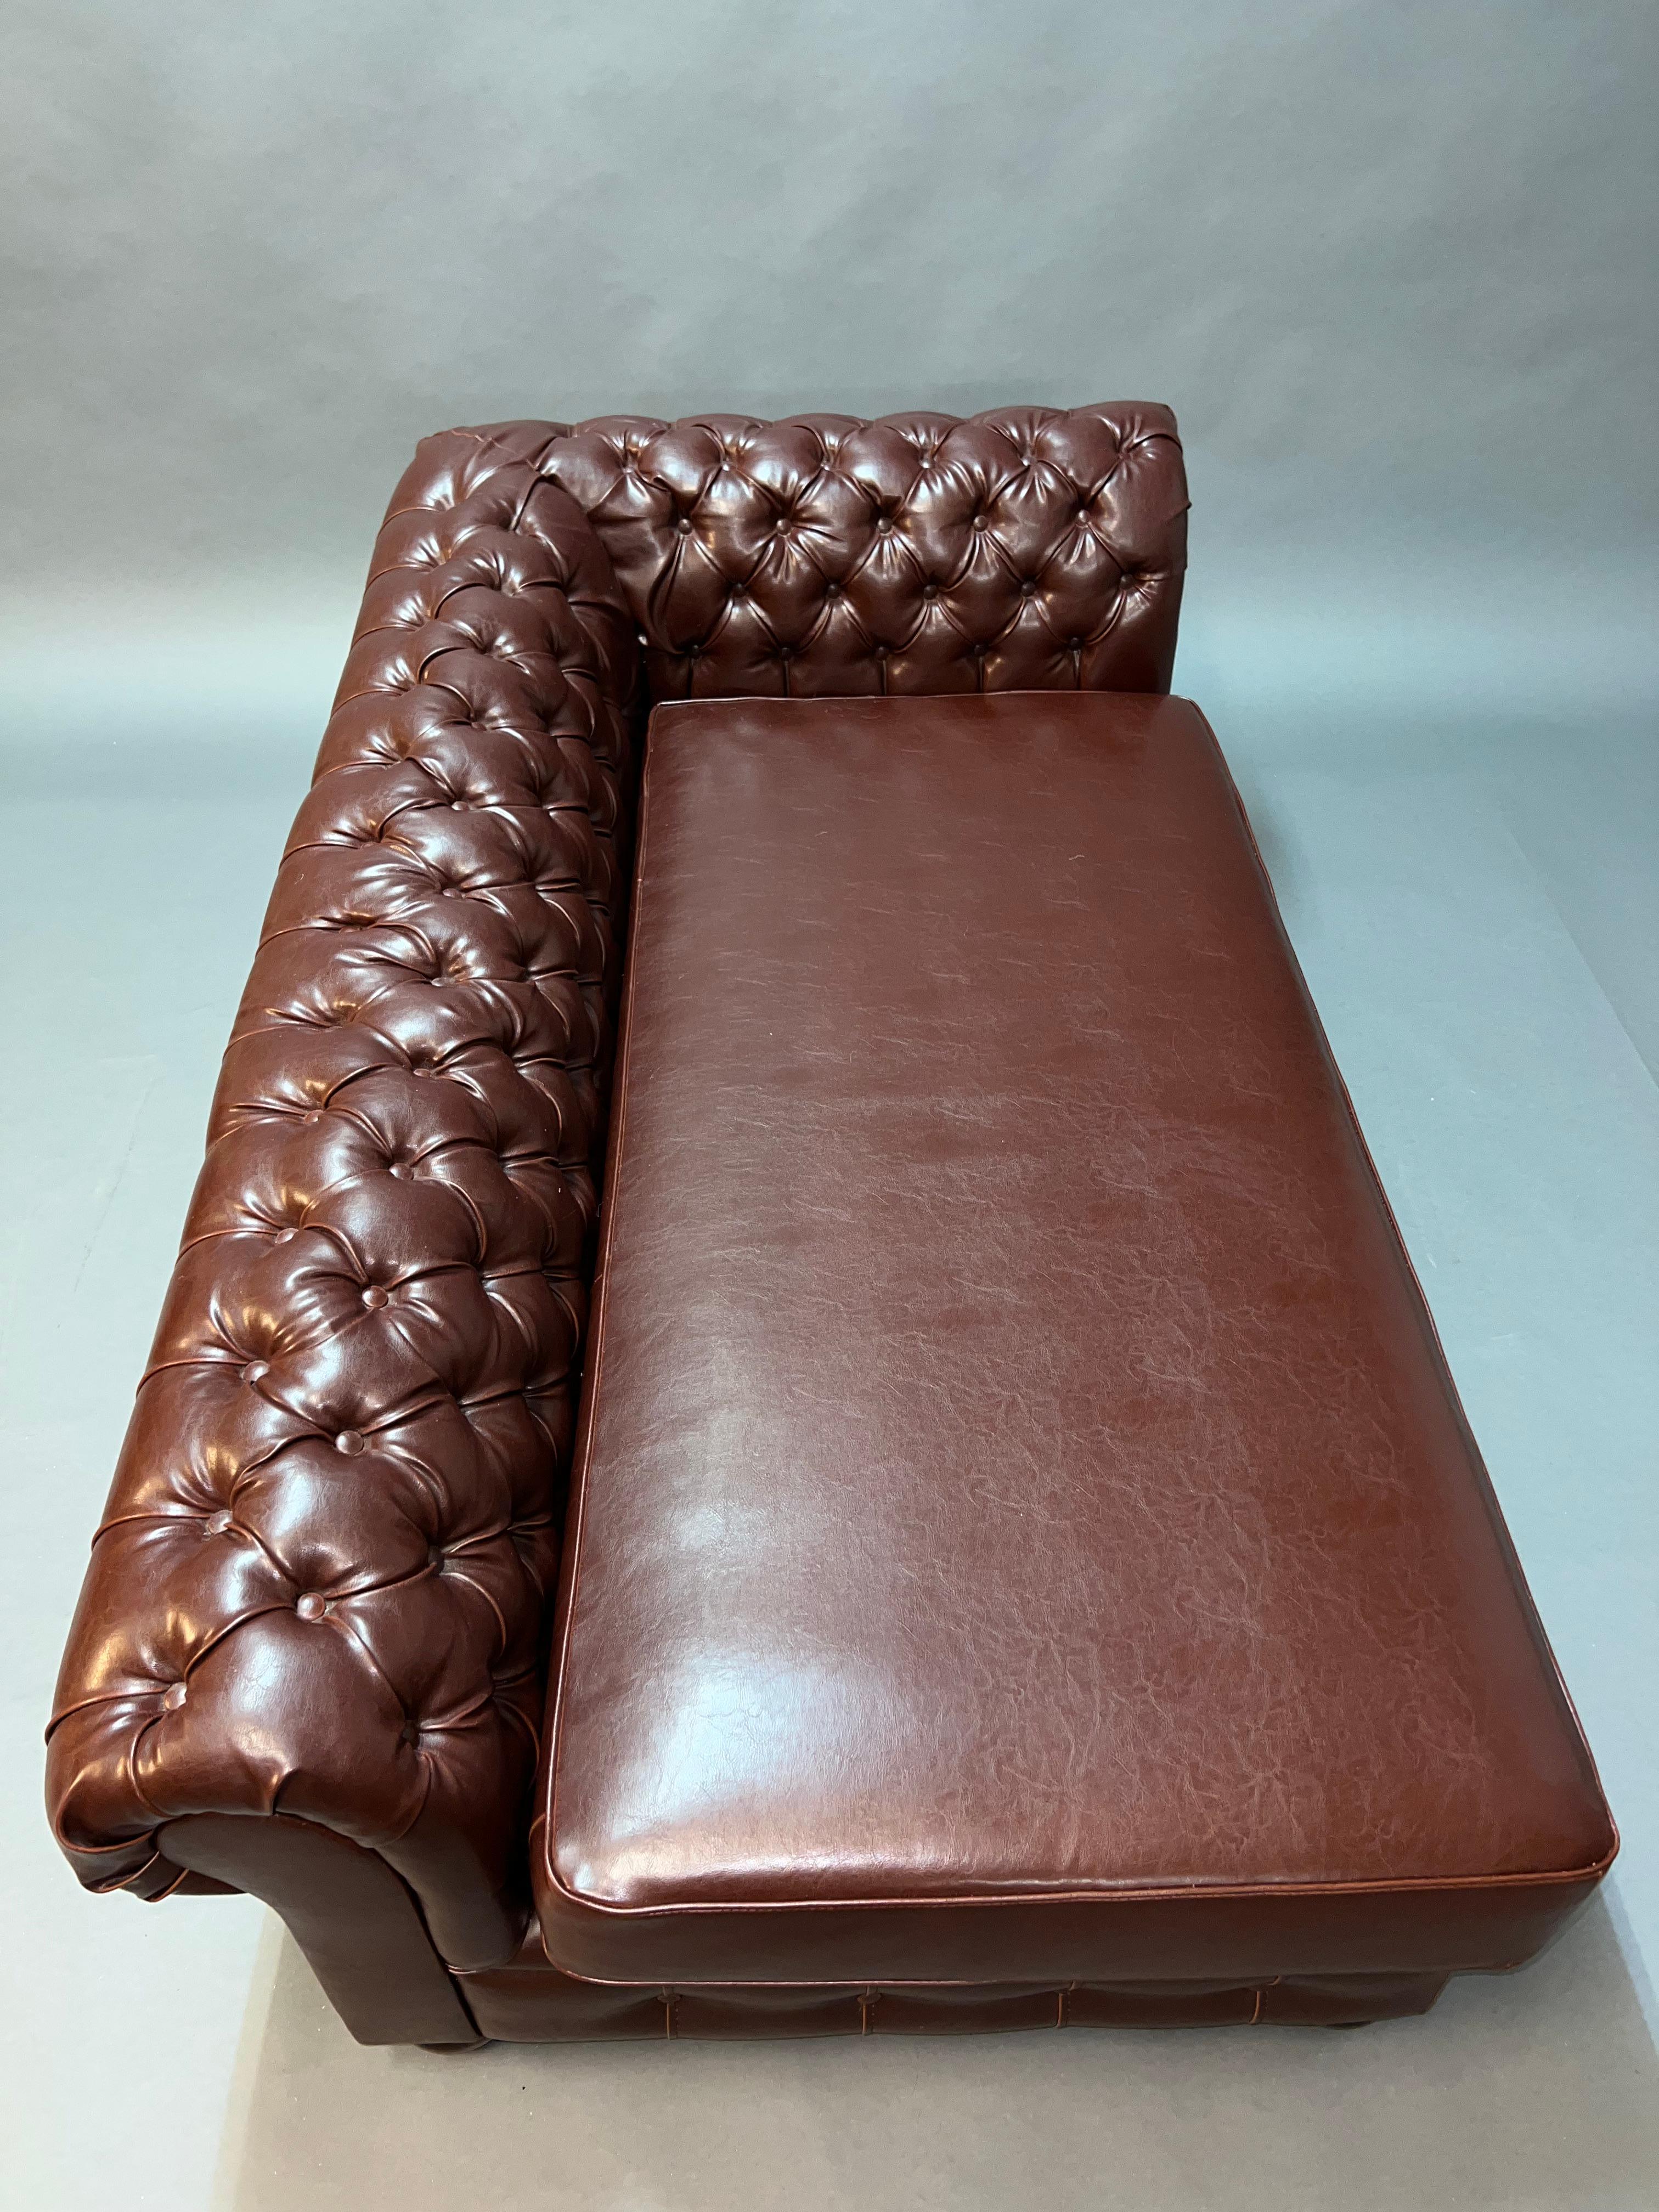 Lovely Vintage Chesterfield Brown Leder Look Chaise Lounge Daybed Sofa im Angebot 1